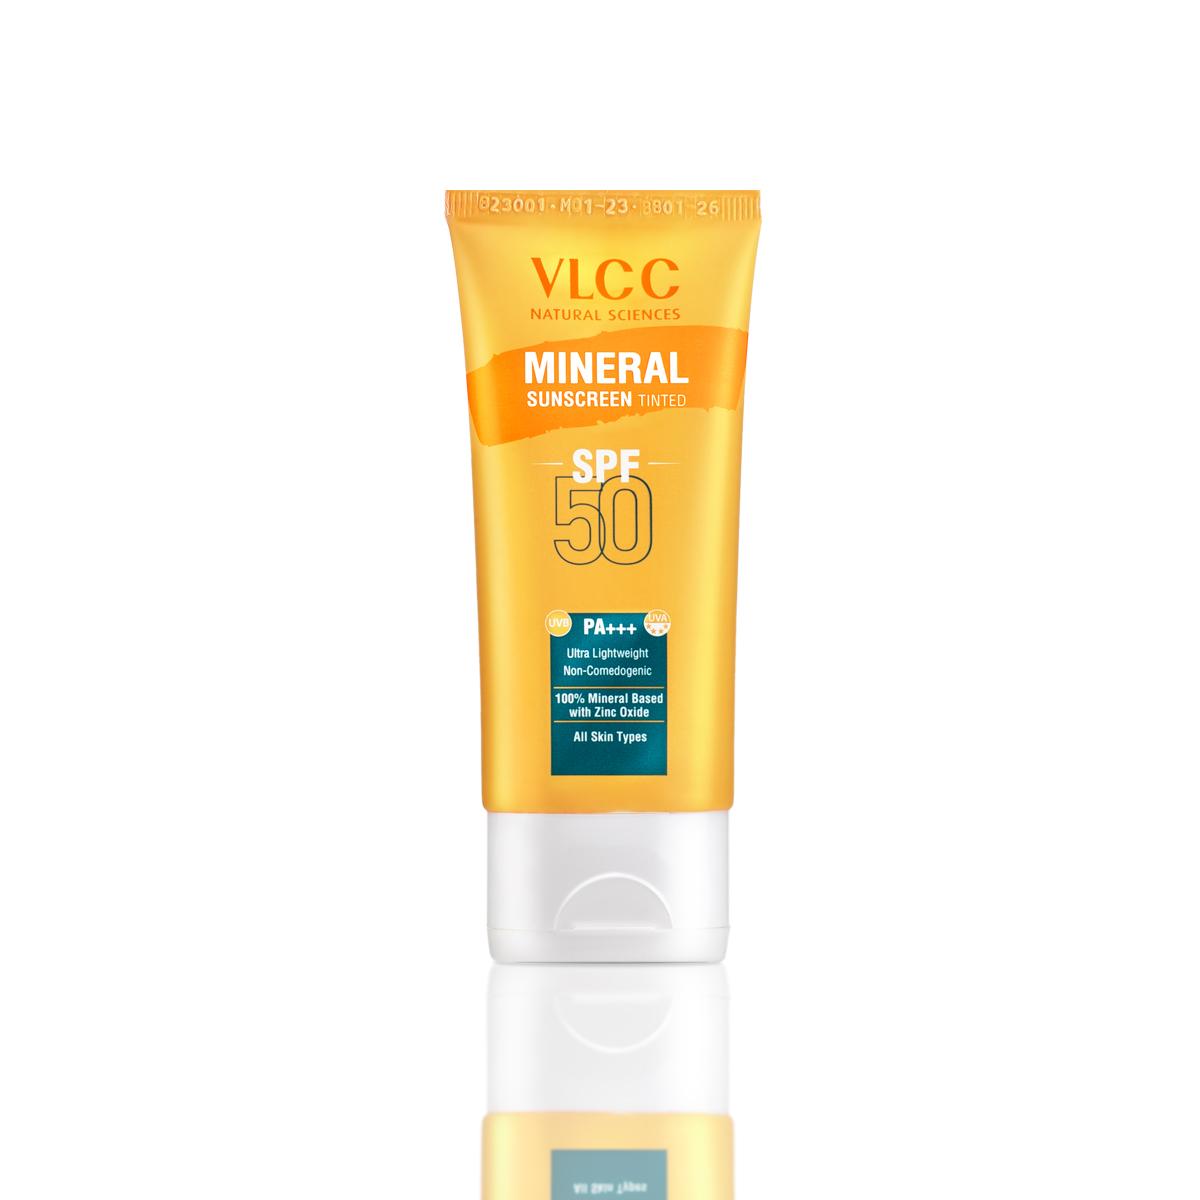 VLCC Mineral Sunscreen Tinted SPF 50 PA+++ - Ultra Lightweight Non-Comedogenic Sun Protection with Tinted Coverage